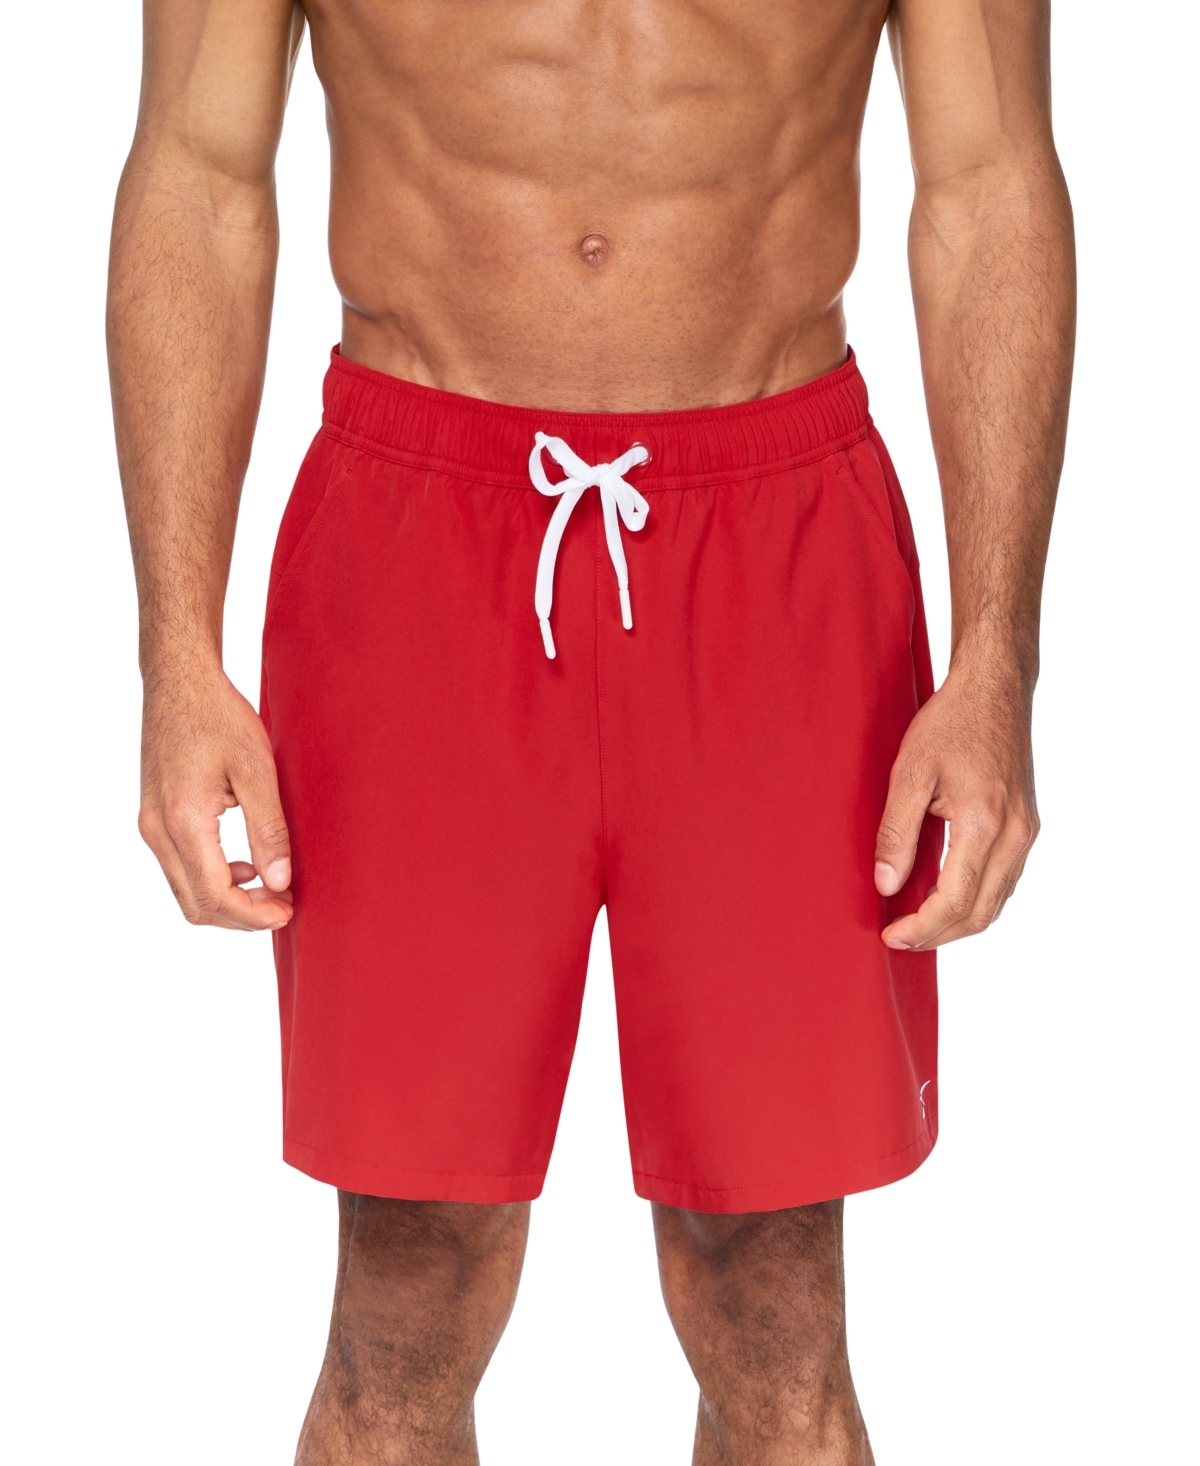 Reebok Men's Quick-dry 7" Core Volley Swim Shorts In Red